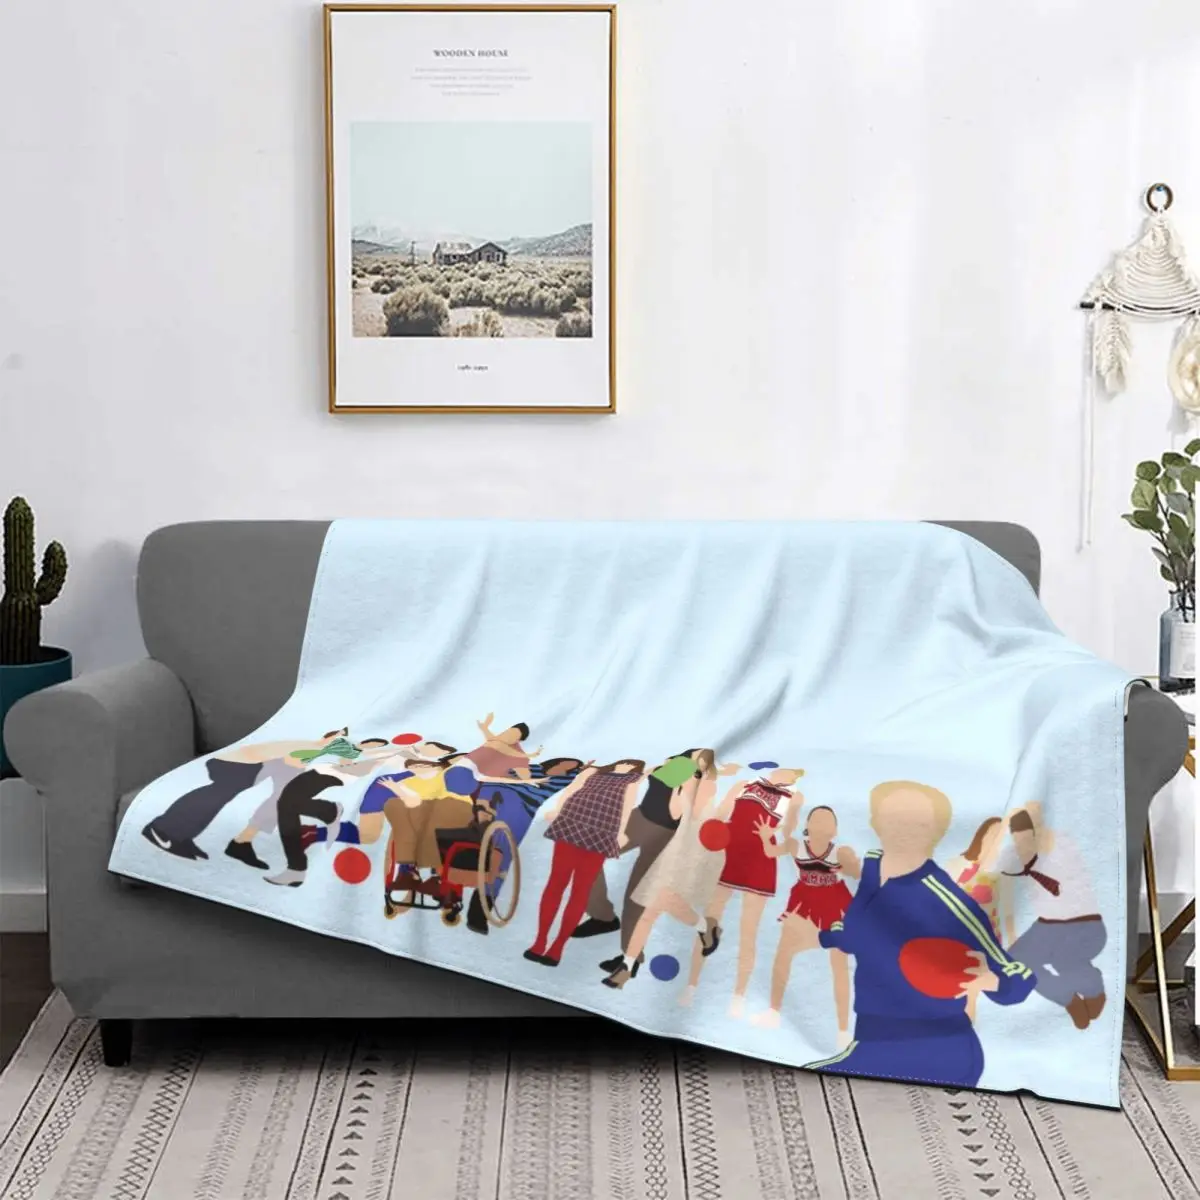 

Glee Characters Blankets Fleece Spring/Autumn Tv Show Comedy Portable Soft Throw Blanket for Bed Bedroom Bedspread